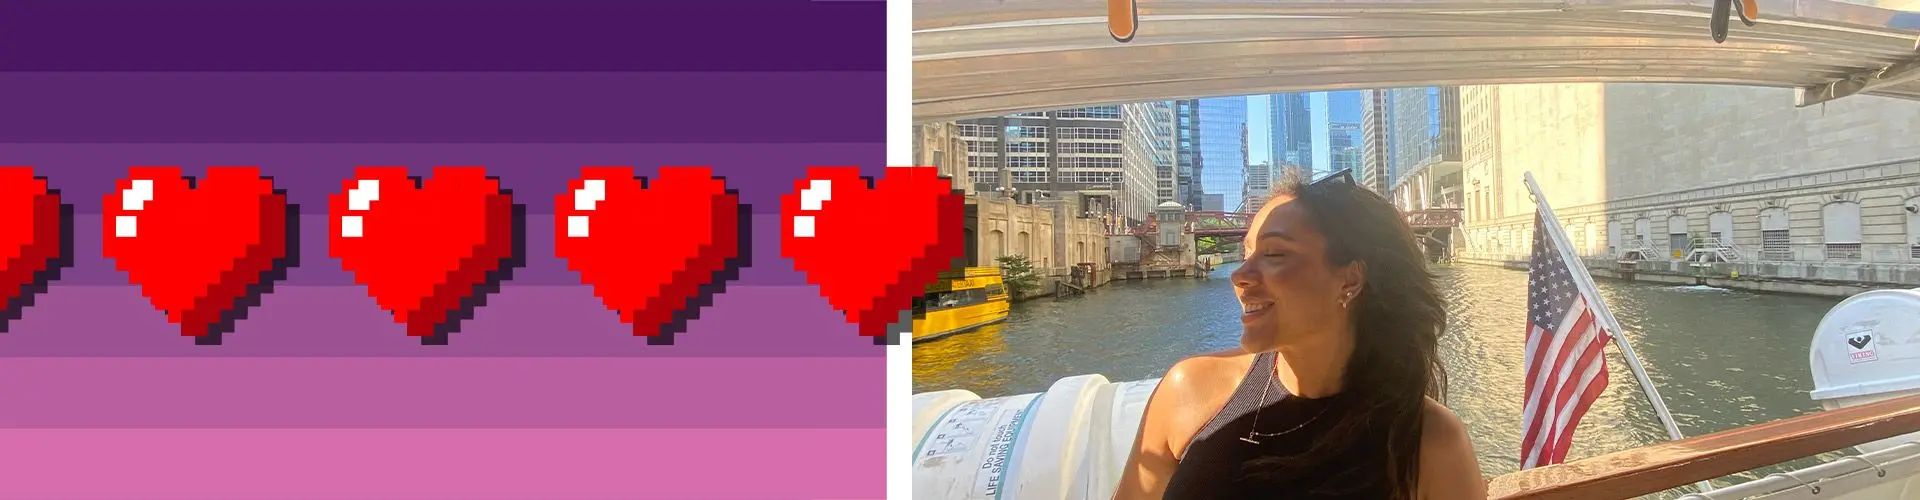 Red hearts come from the left on a purple pixelated background. Guy and girl pose for picture in NY.